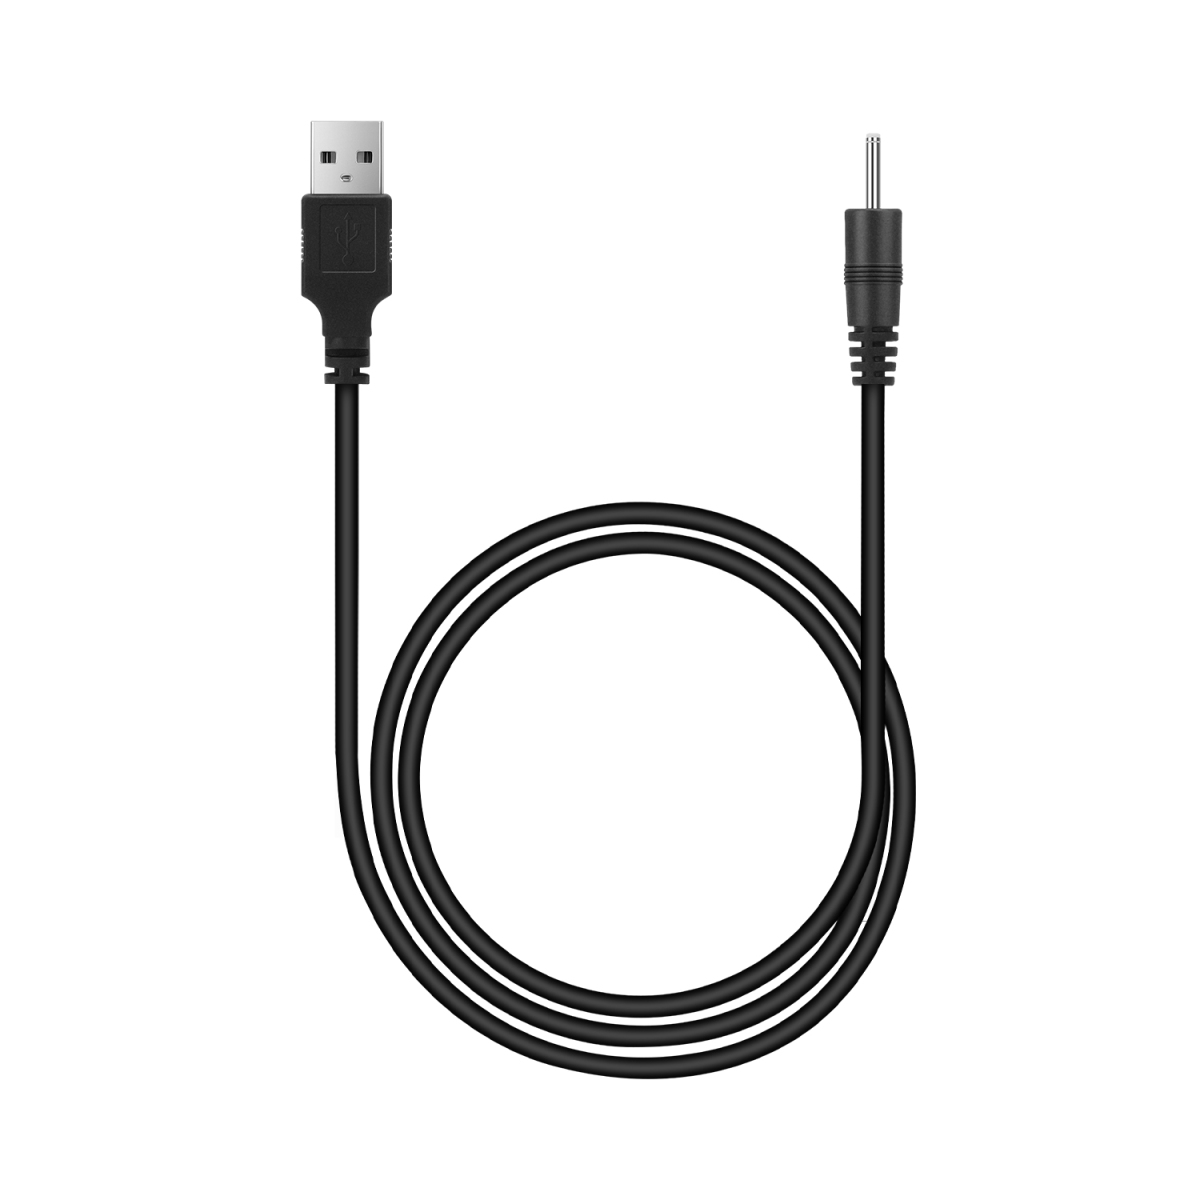 USB DC Charger Charging Cable Cord For Huion Rechargeable Tablet Stylus Pen Lysee Data Cables 